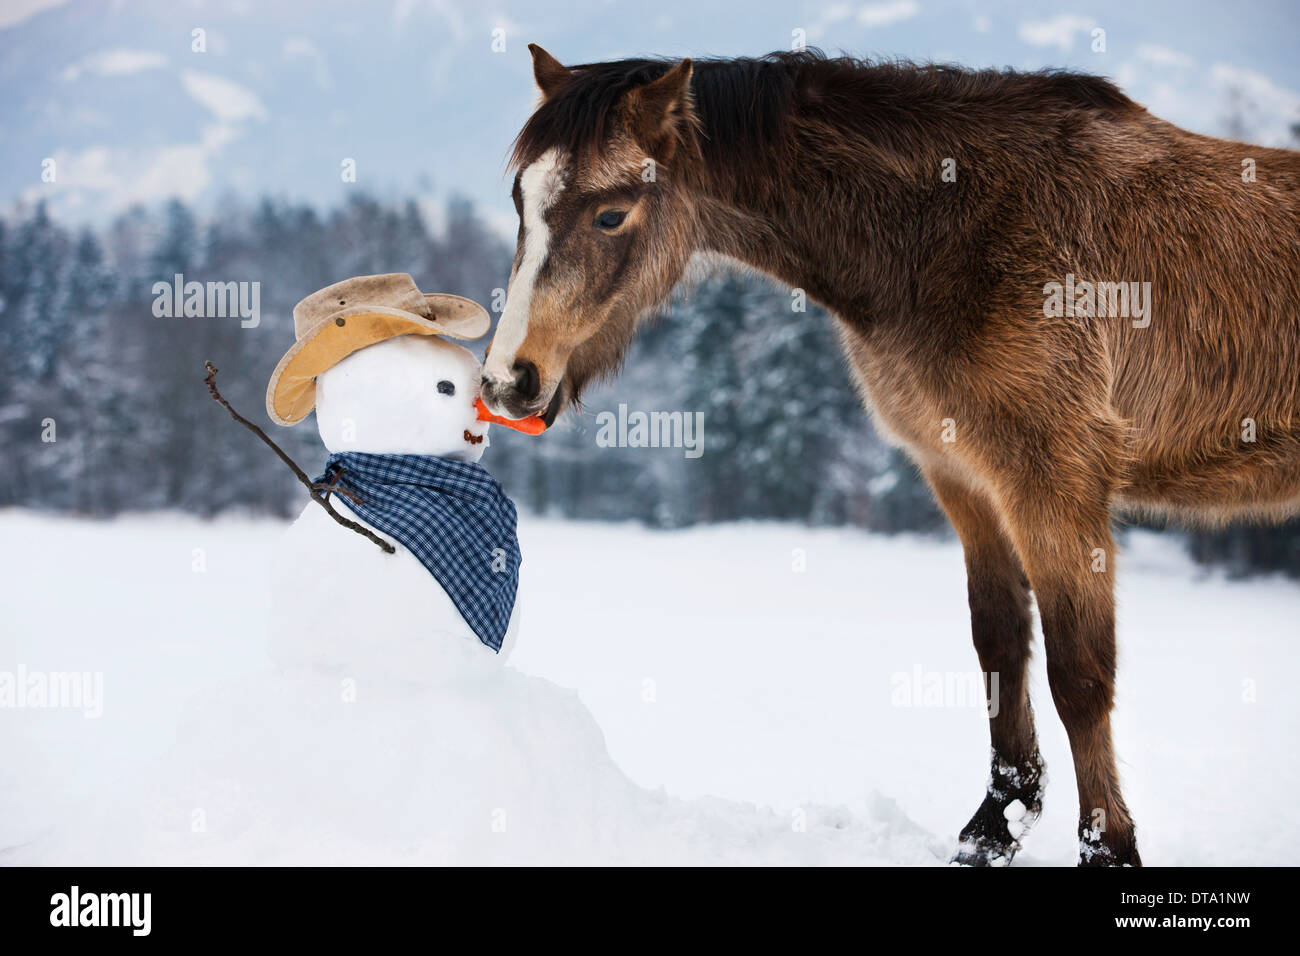 Welsh Mountain Pony eating carrot nose of a snowman in western styling, North Tyrol, Austria Stock Photo